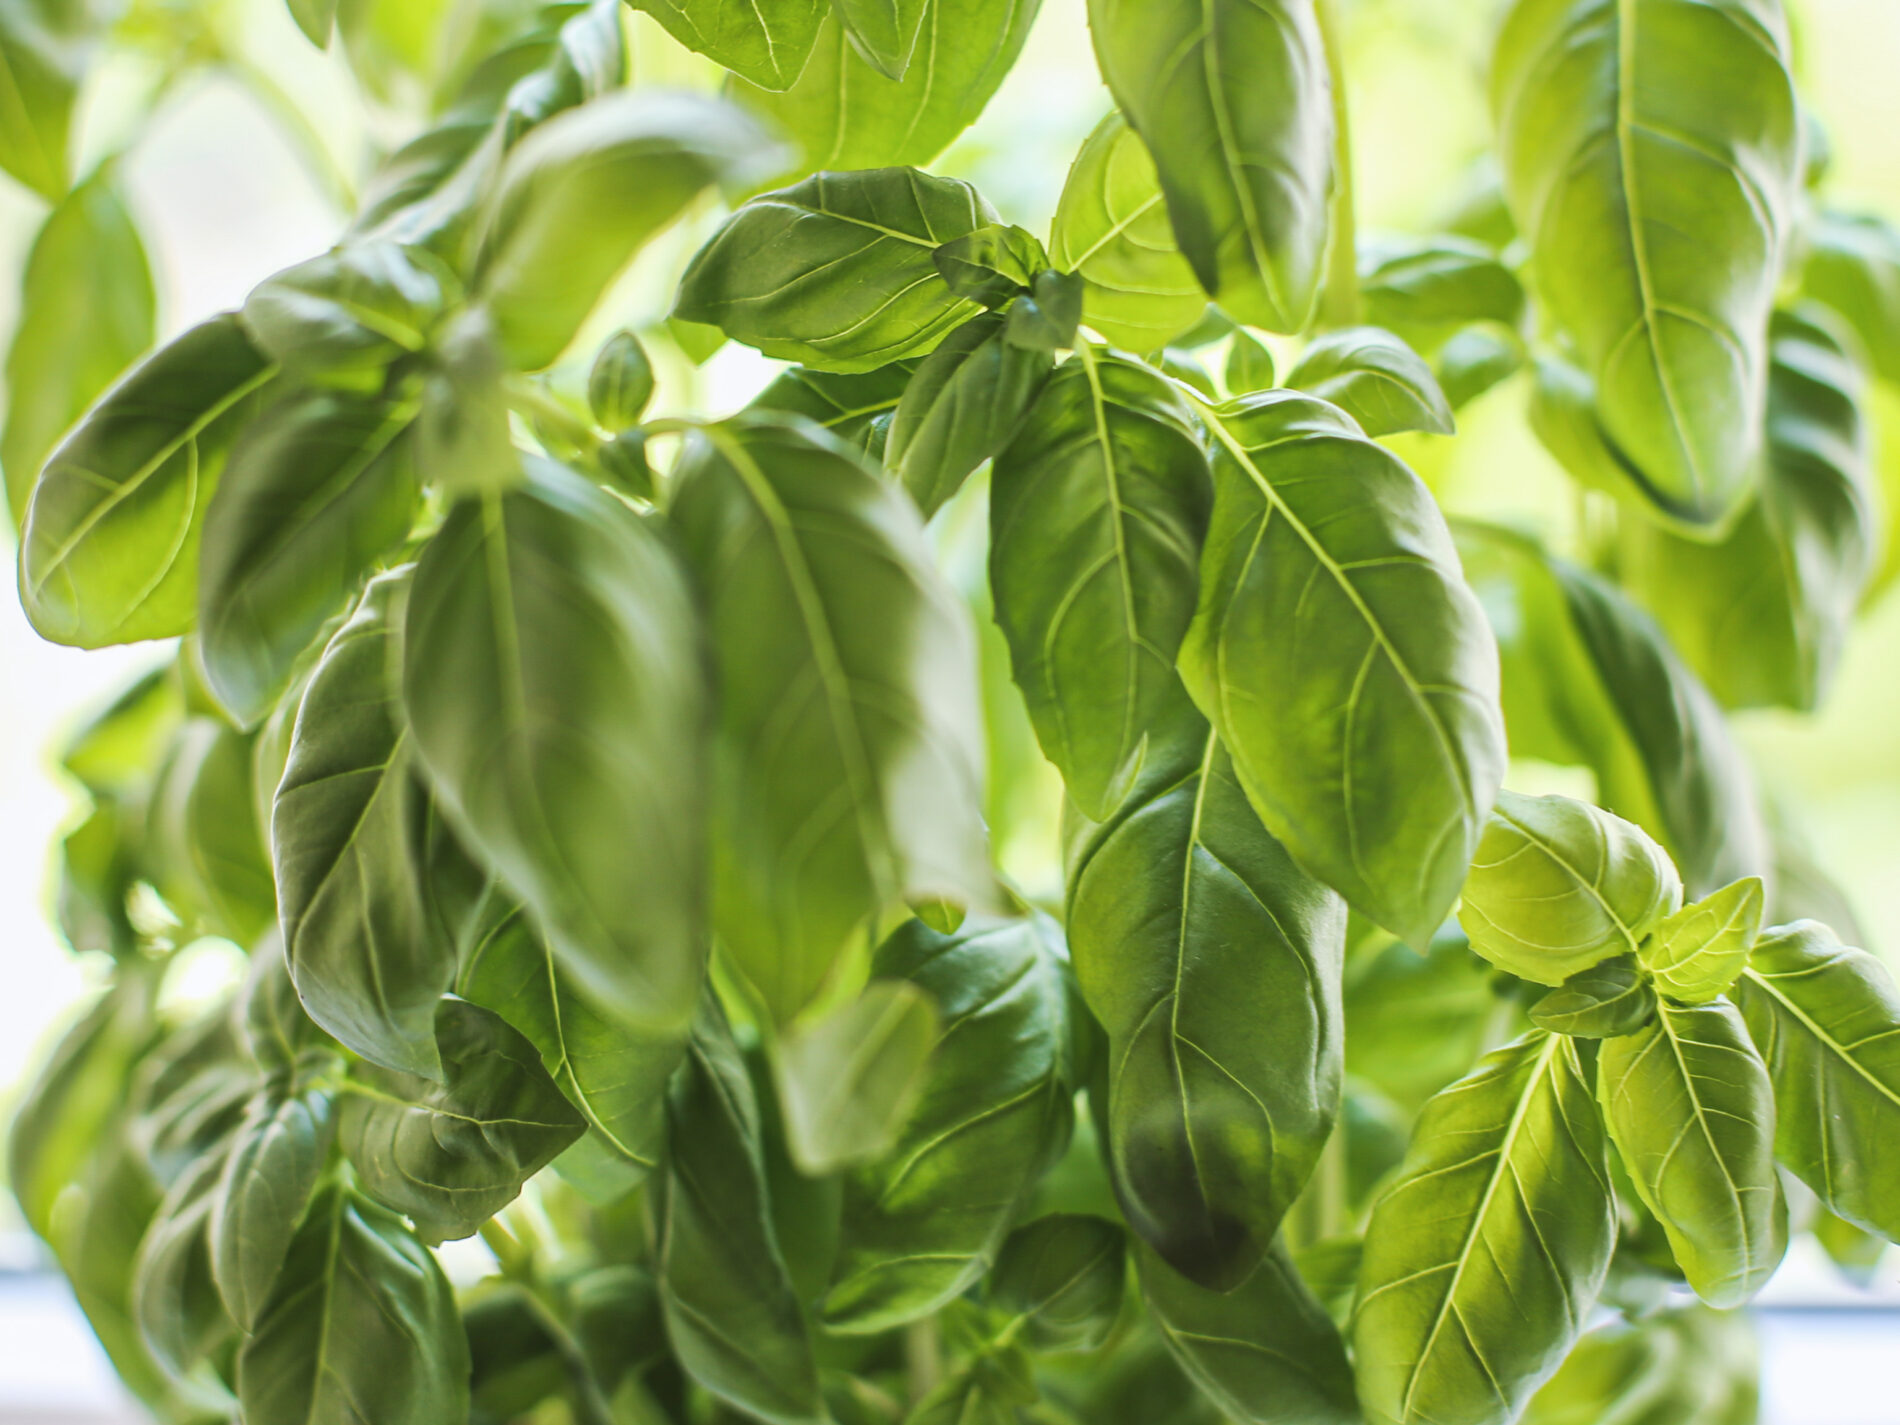 close-up of green basil leaves